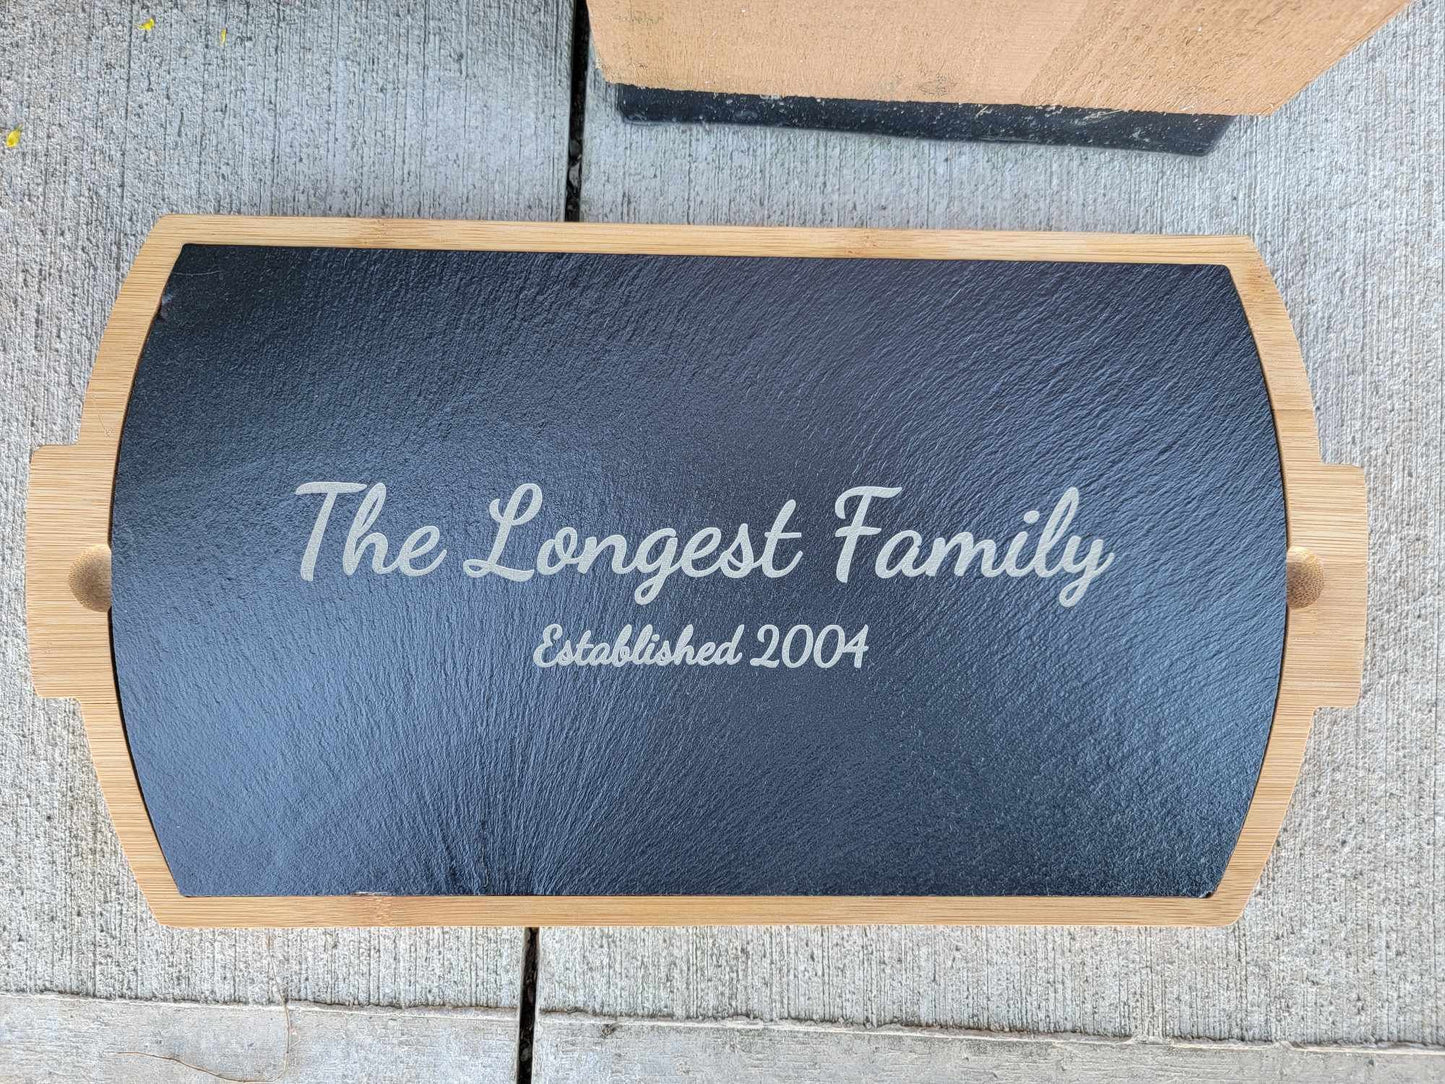 Wedding Gift New Home Valentines Day charcuterie board Wood and Slate Cutting Printed Personalized Create Your Own Name Family Engaged